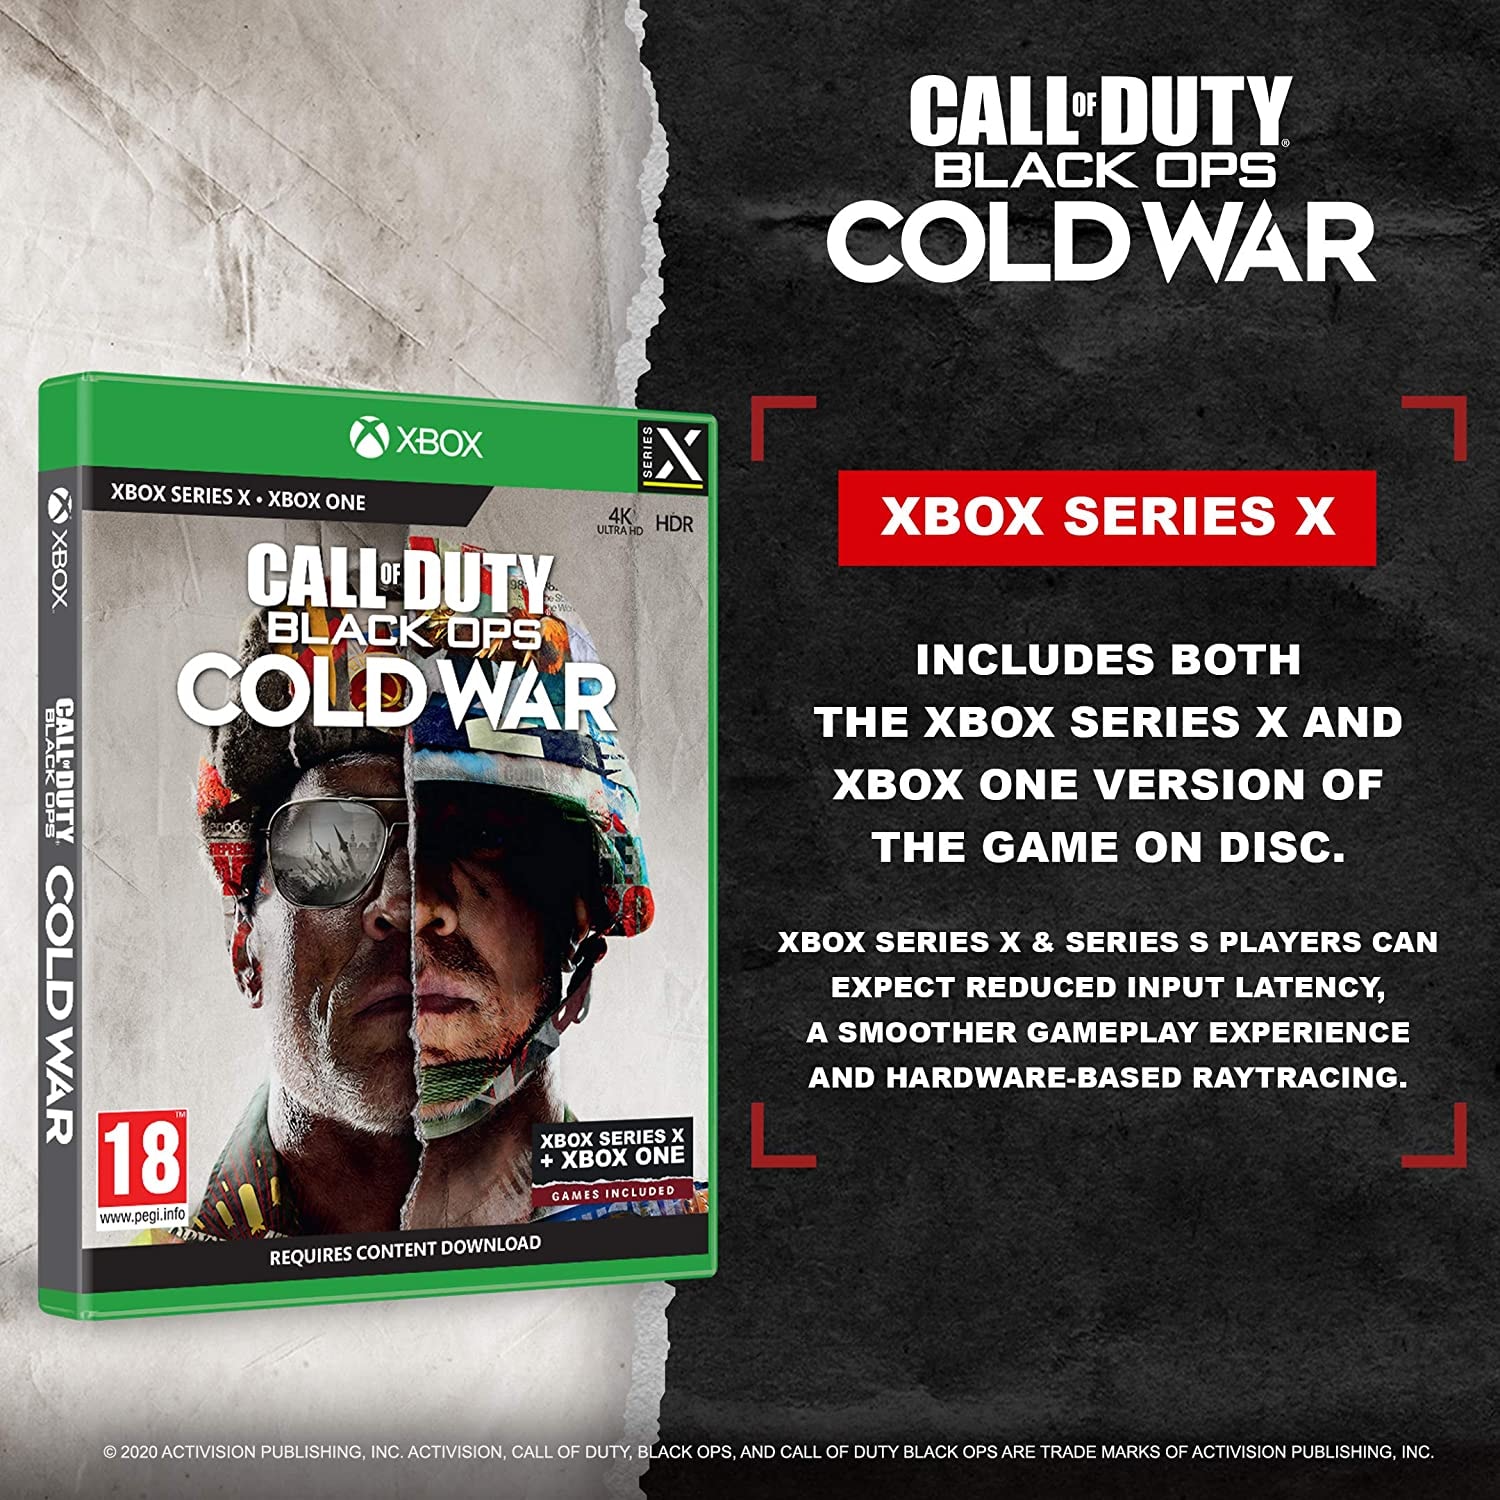 Call of Duty Black Ops: Cold War Xbox Series X Hardcopy (Xbox Series X) Gaming - 3